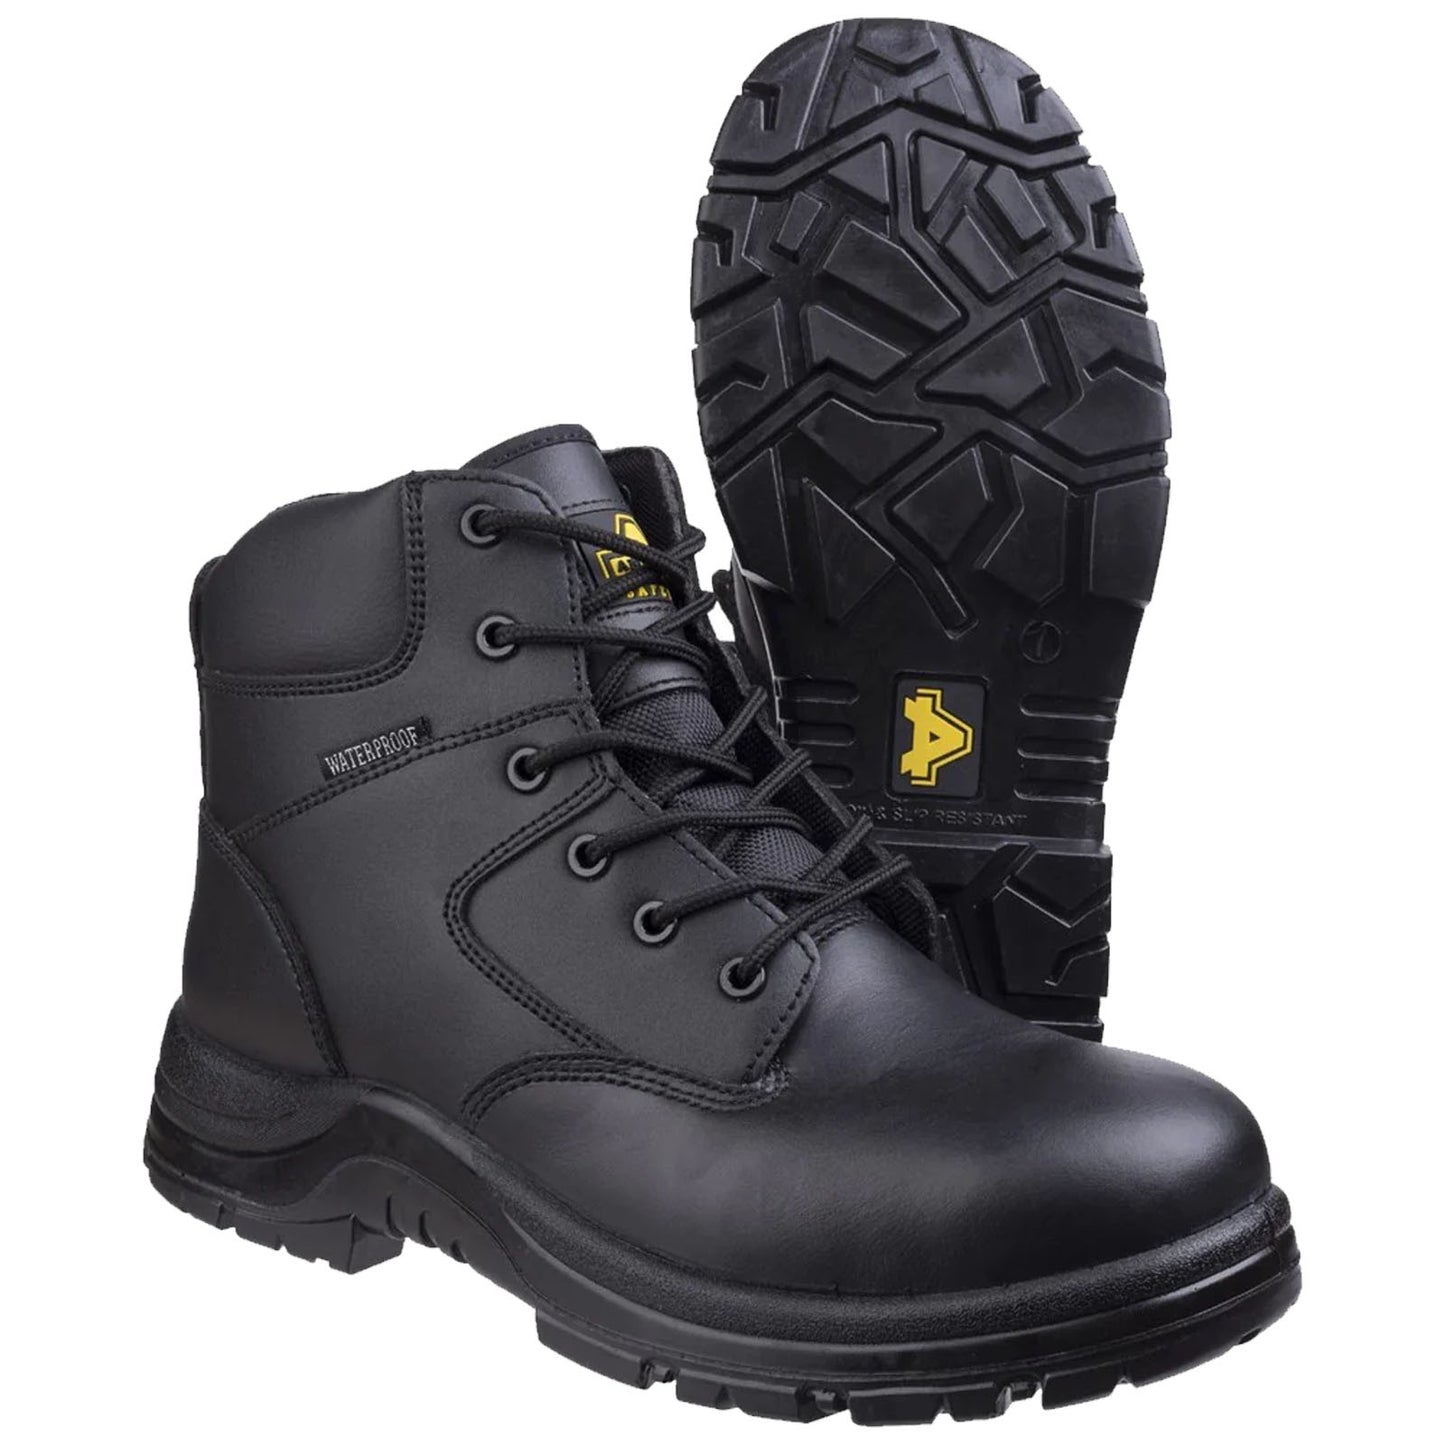 Amblers FS006C S3 Safety Boots